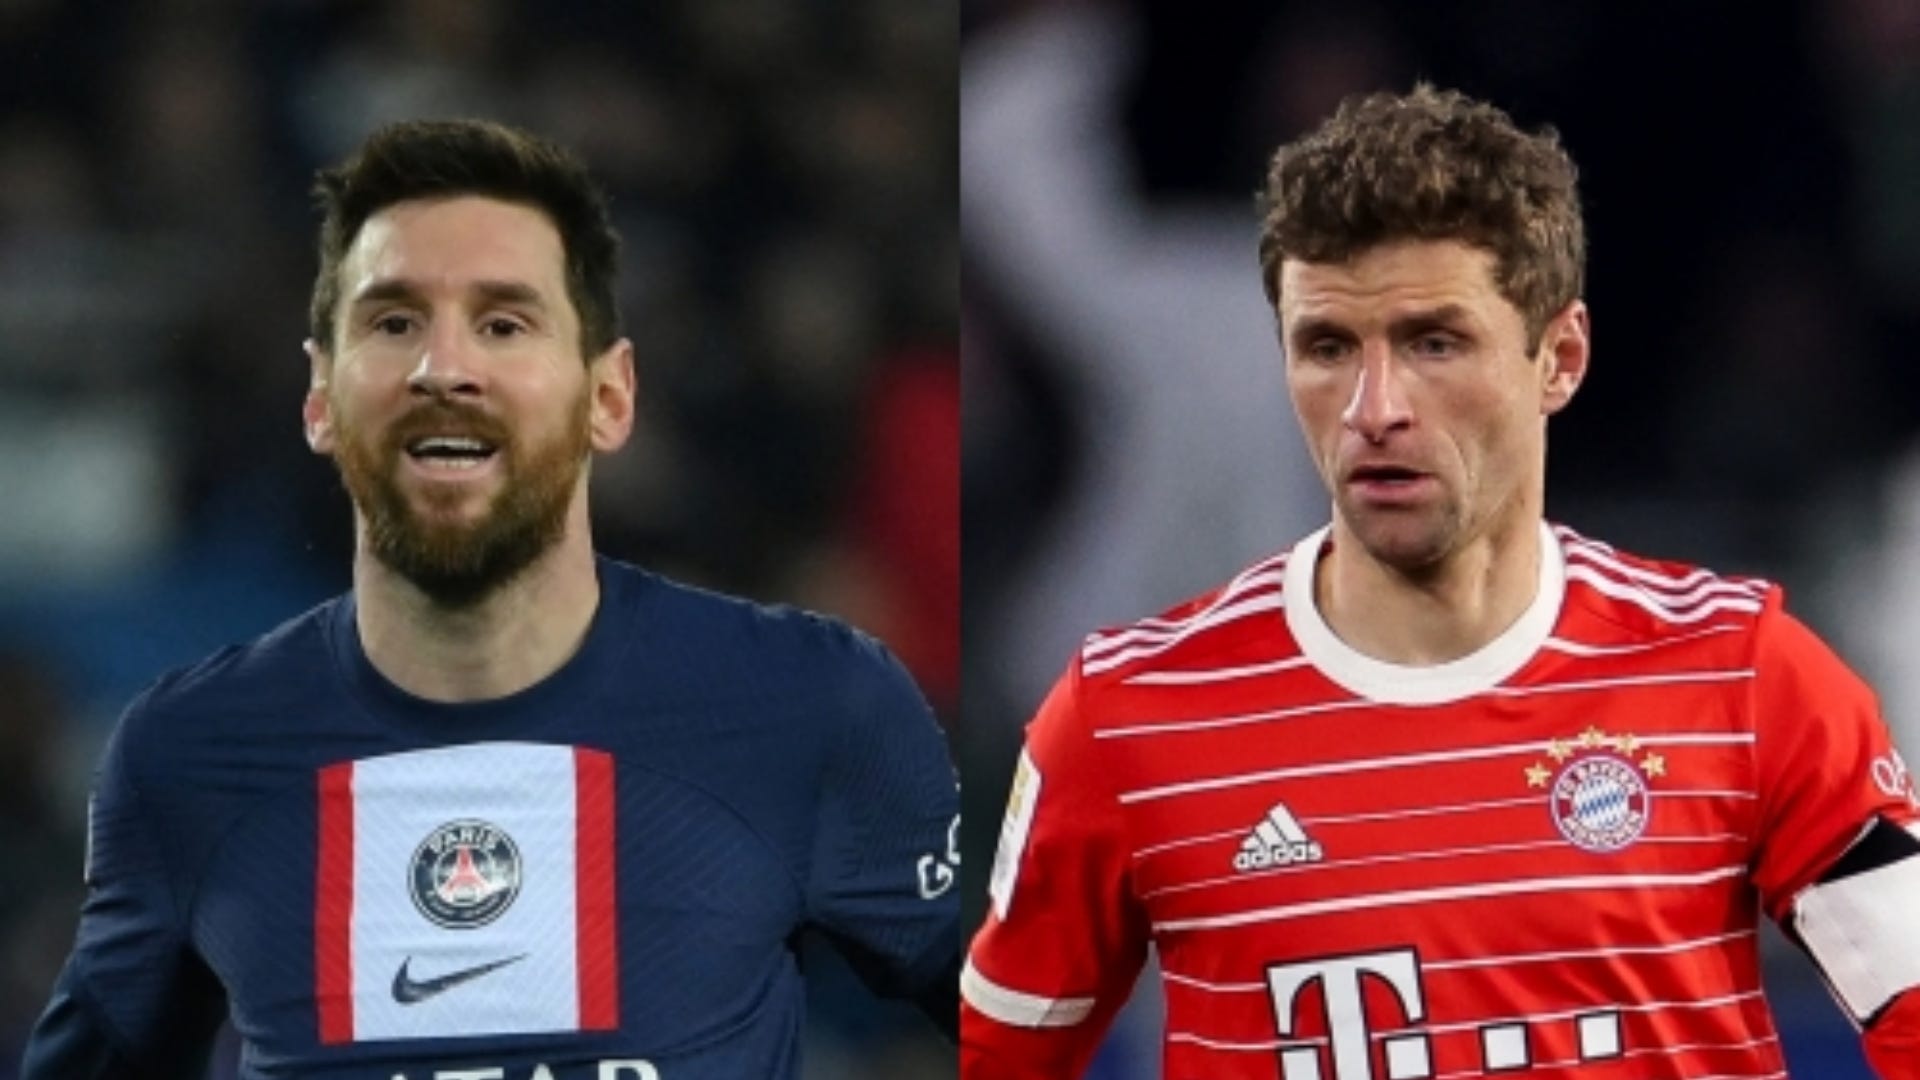 PSG vs Bayern Munich Live stream, TV channel, kick-off time and where to watch Goal